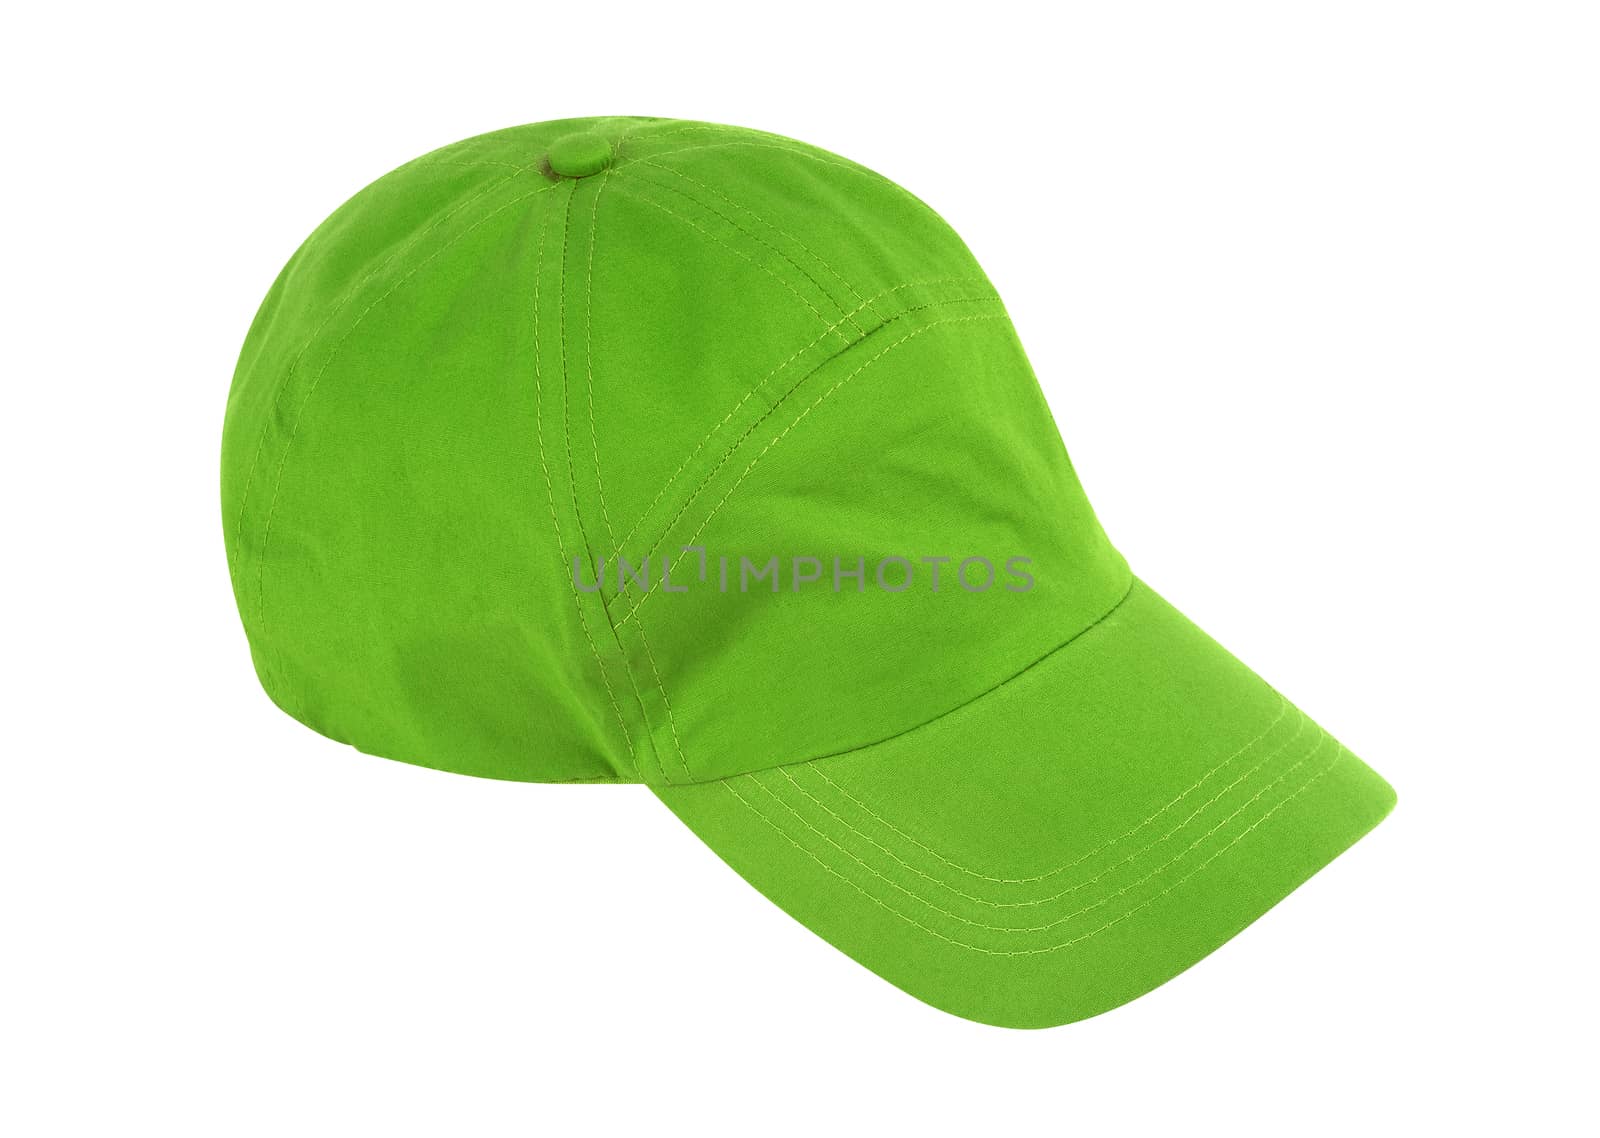 Baseball cap isolated on white background w/ clipping path by kravcs